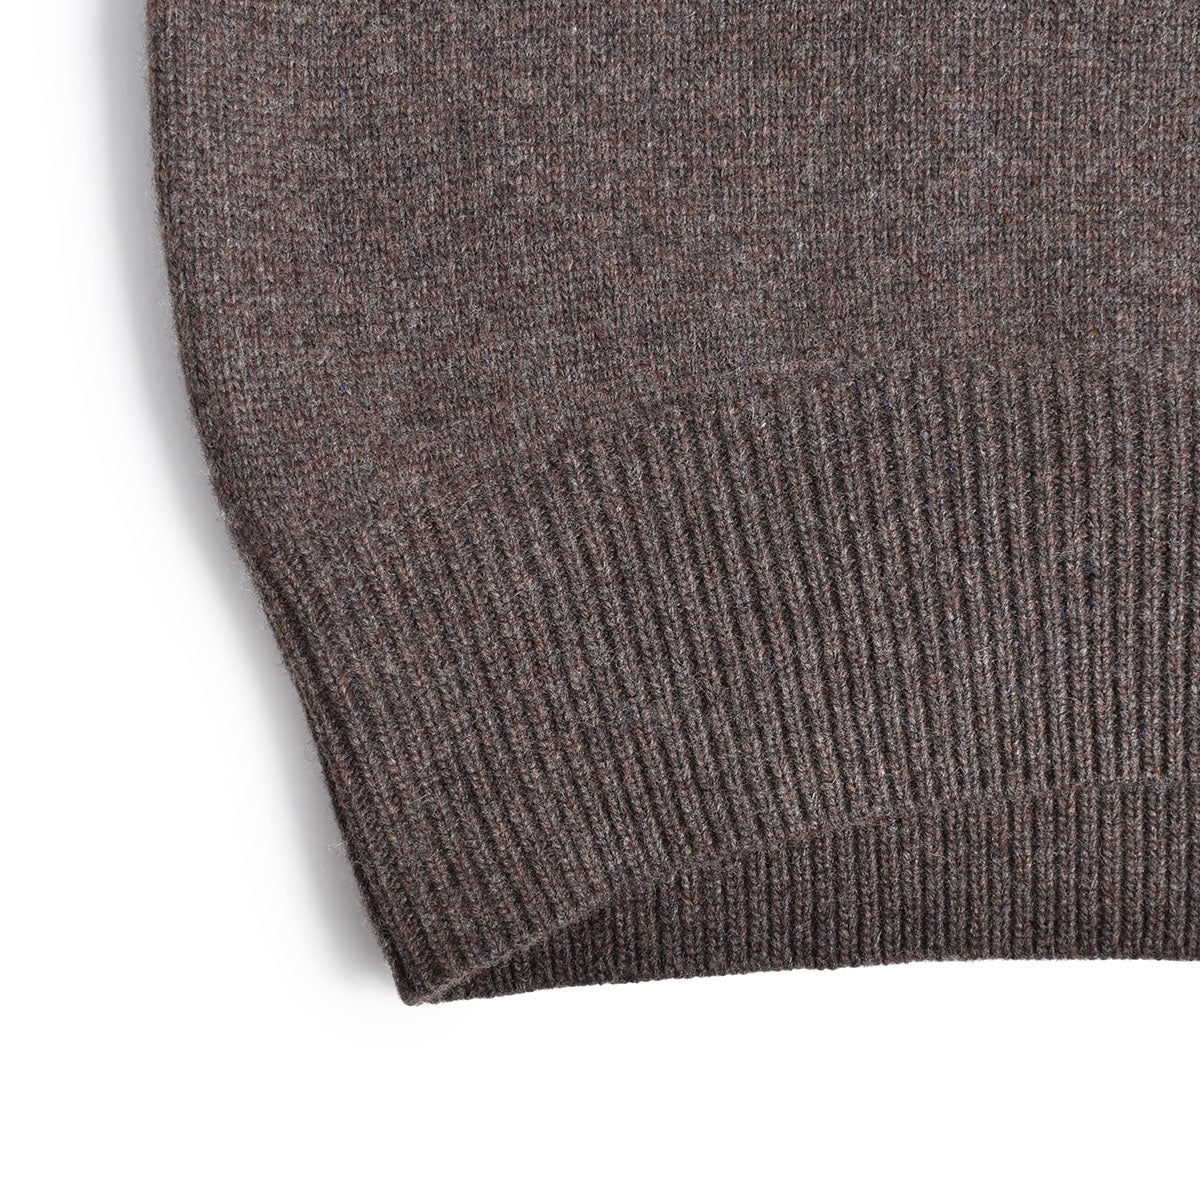 TODAYFUL]Merinowool Crewneck Knit/BROWN(12320515) – R&Co.